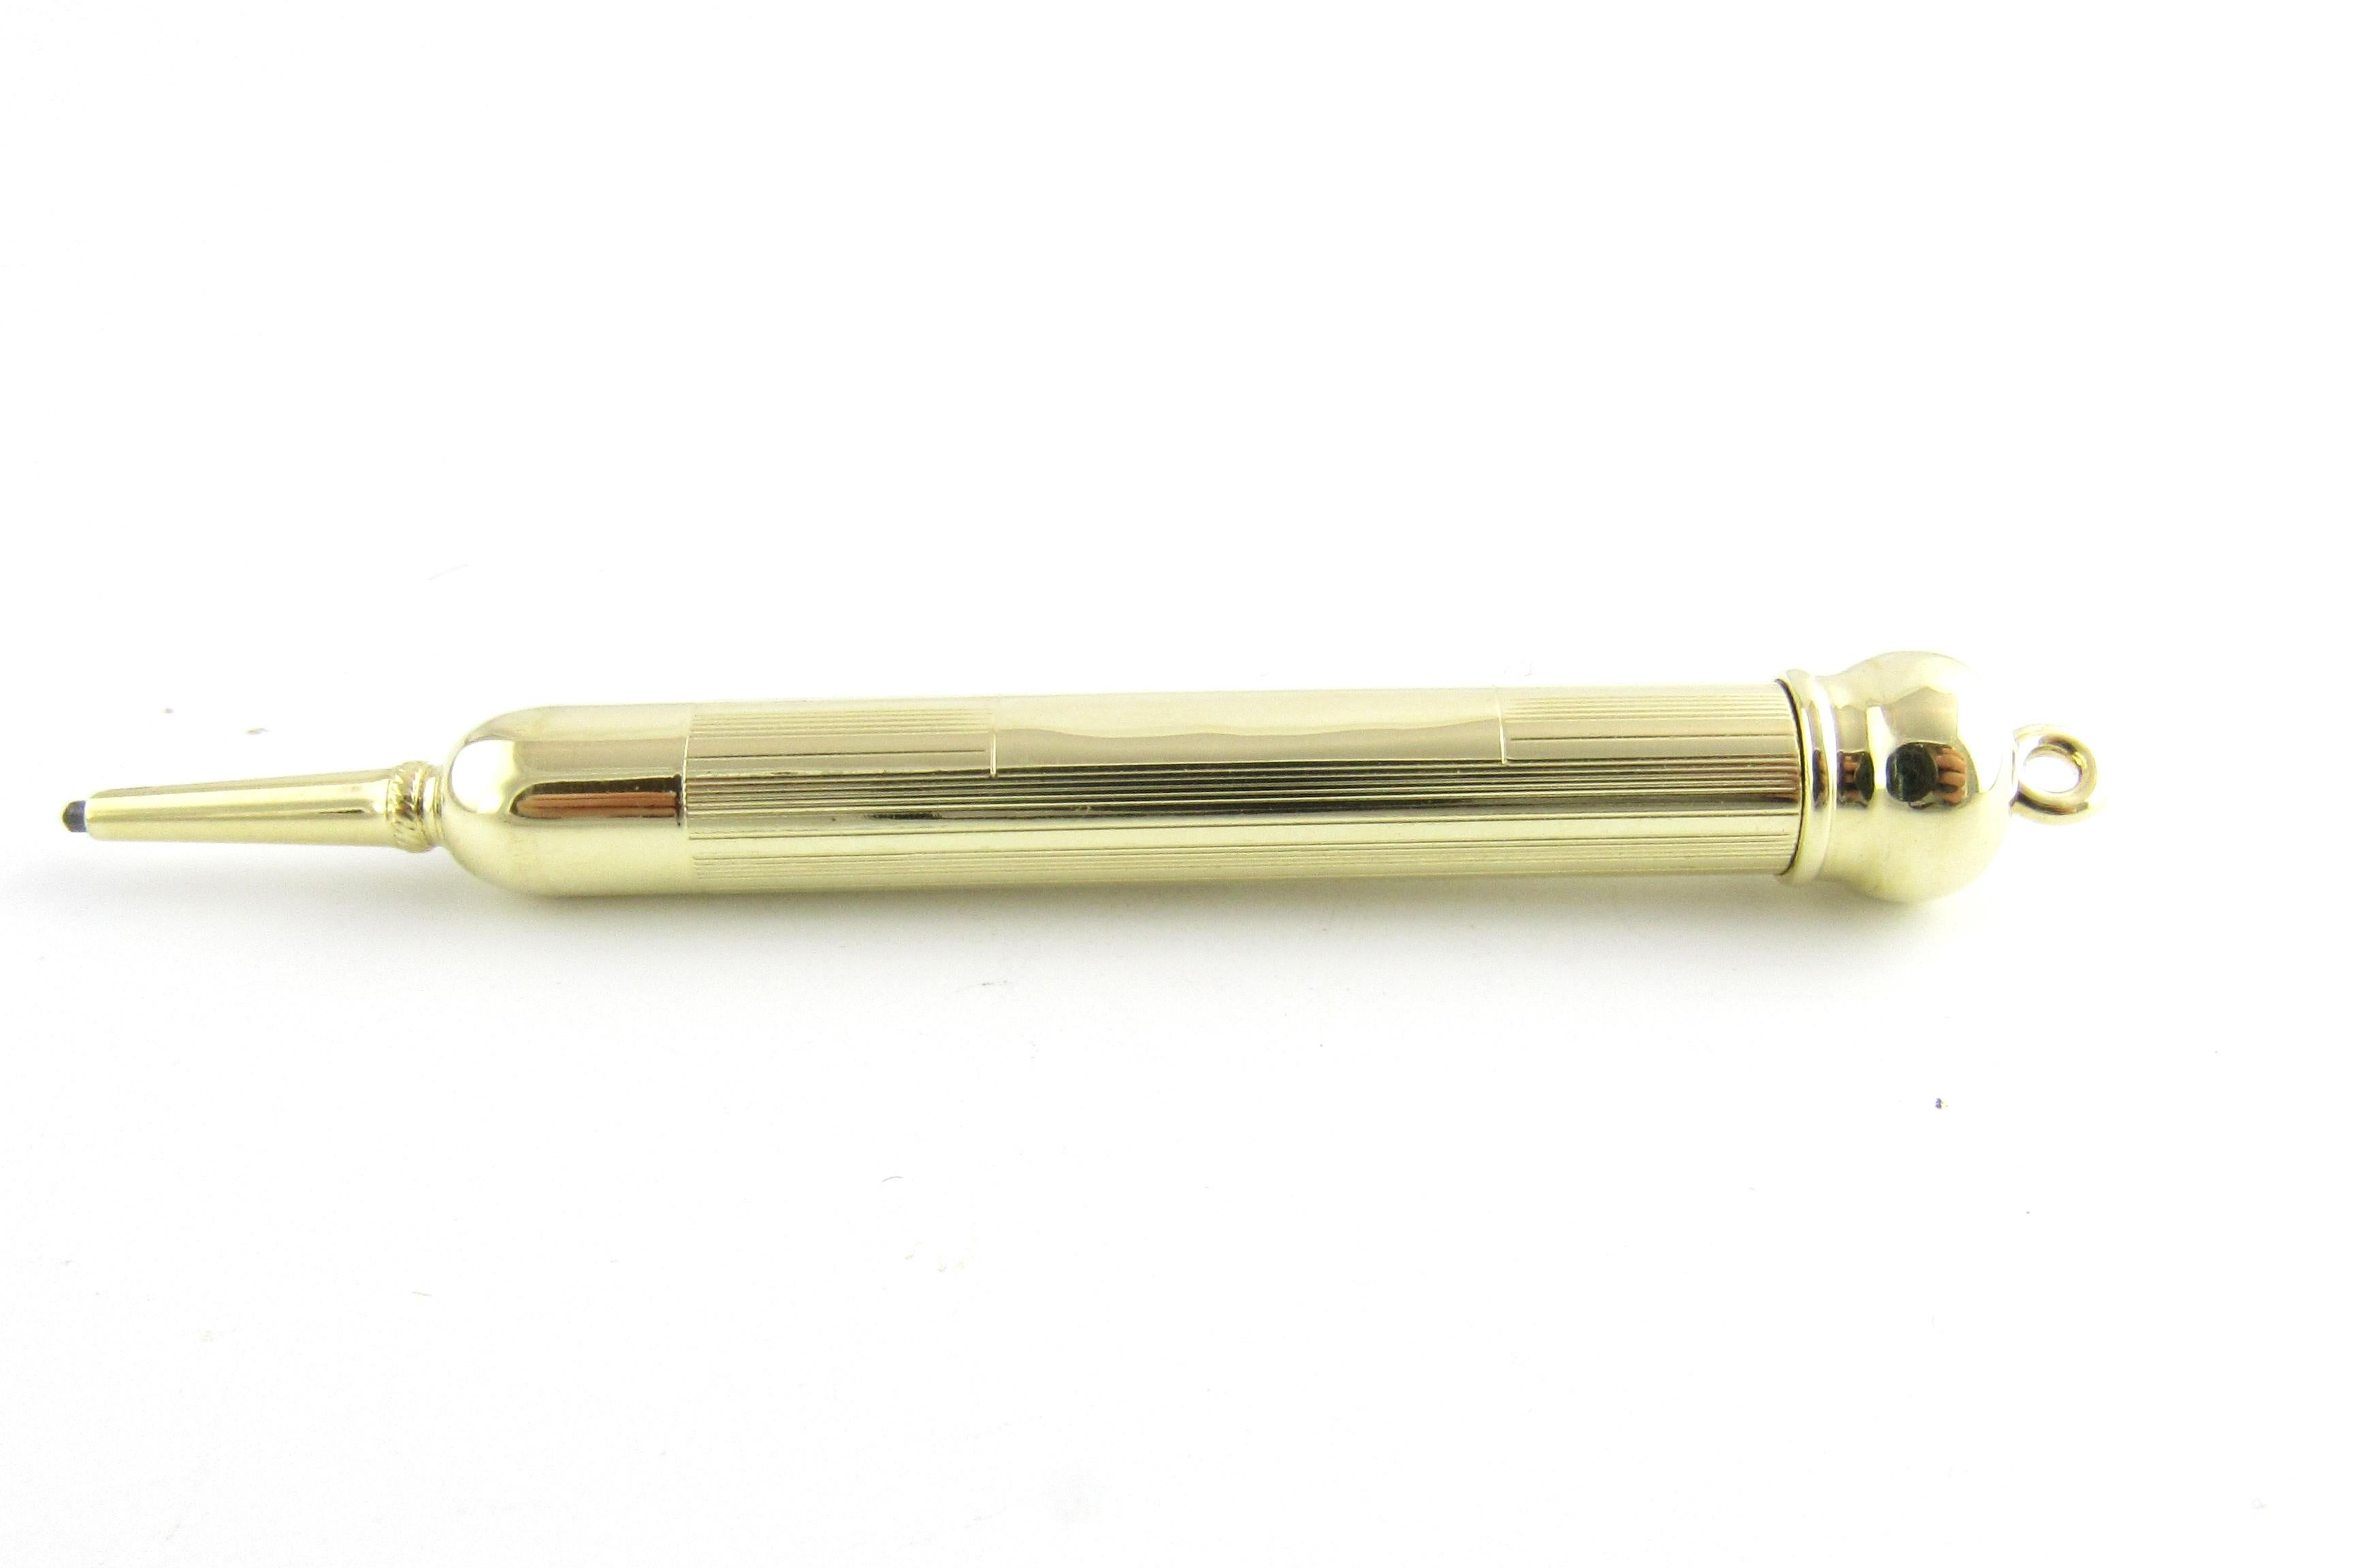 14 Karat Yellow Gold Telescopic Pencil-

This elegant piece features a telescopic pencil that opens 96 mm. Can be attached to chain or fob.

Size: 67 mm x 9 mm 

Weight: 6.9 dwt. / 10.8 gr.

Hallmark: 14 ct.

Very good condition, professionally